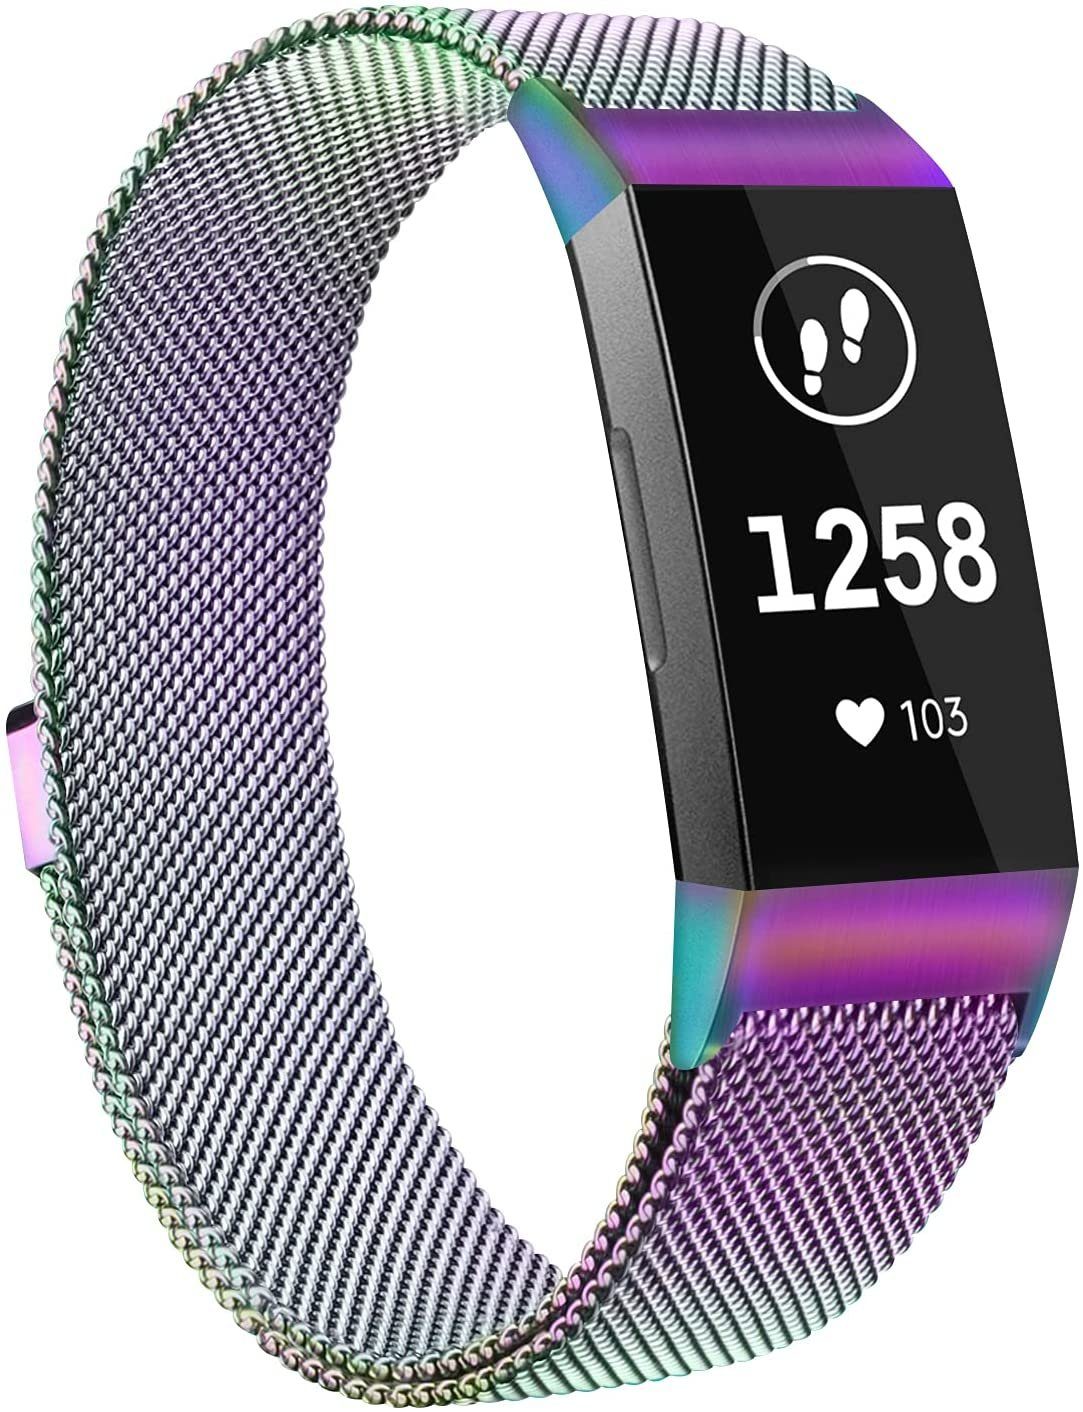 Armband zggzerg Fitbit 3 Armband Fitbit Mehrfarben Fitbit 4 Charge Charge Uhrenarmband